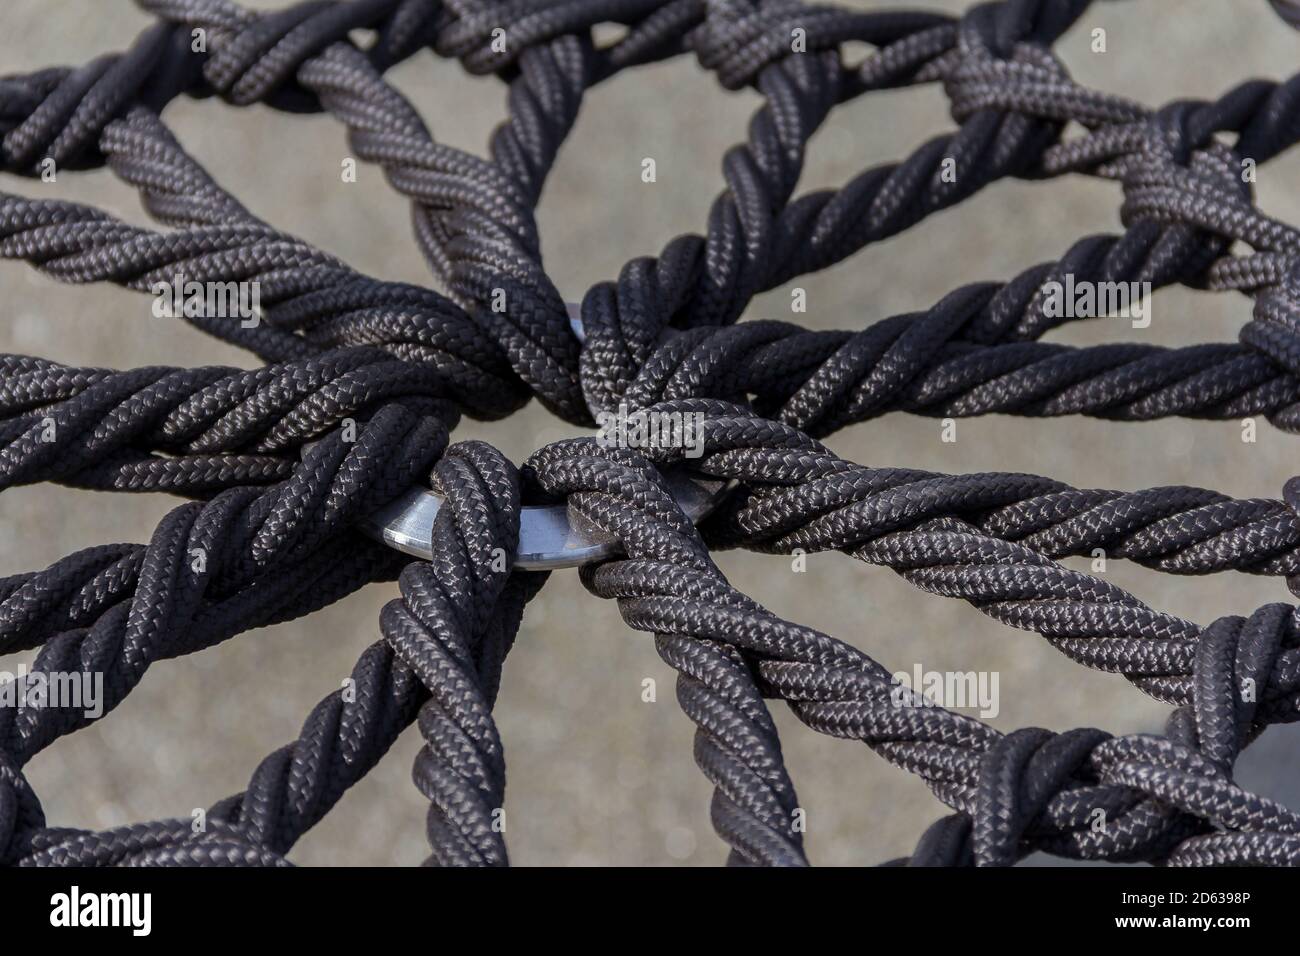 Braided rope background. Hand weaving rope with patterns. DIY and